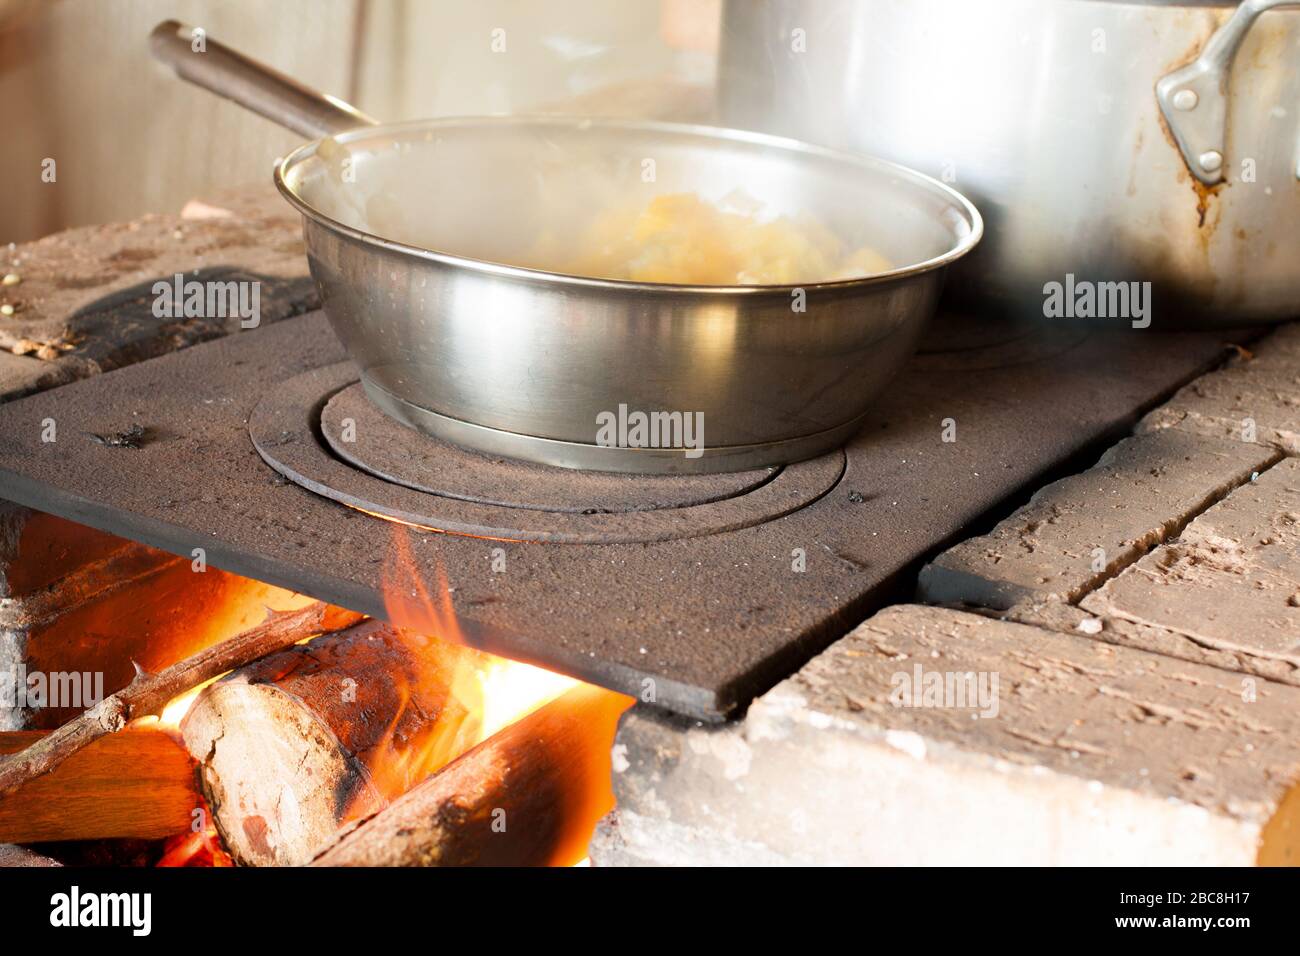 https://c8.alamy.com/comp/2BC8H17/traditional-of-making-food-on-the-stove-over-a-natural-fire-for-cooking-2BC8H17.jpg